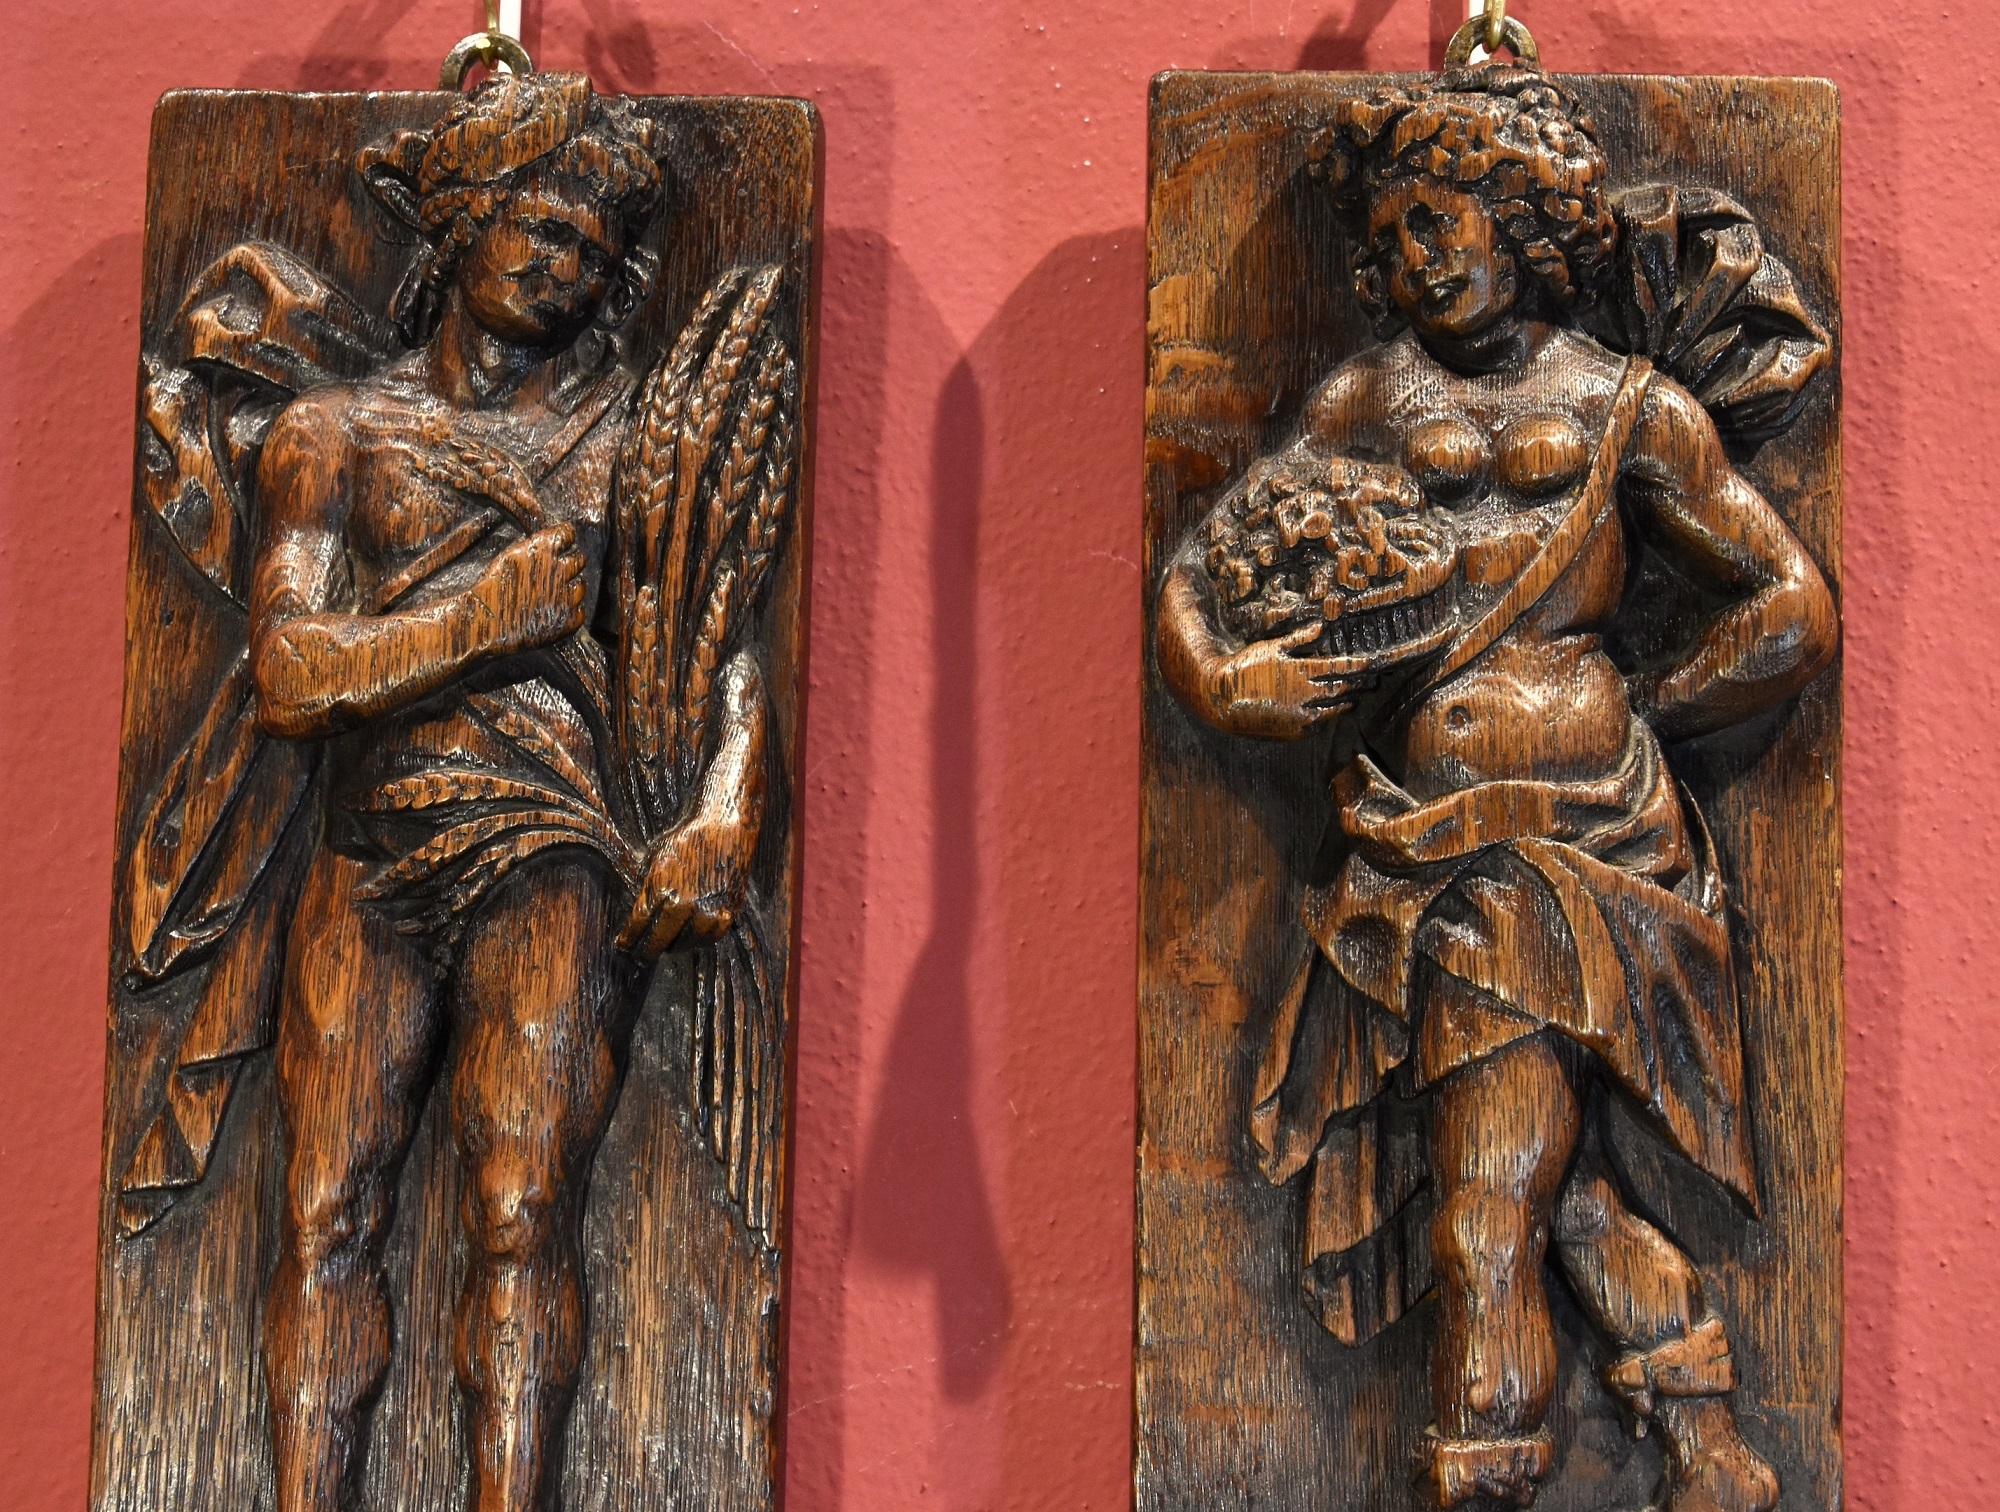 Antichità Castelbarco SRLS is proud to present:

Flemish sculptor of the 17th century
Pair of bas-relief panels depicting the Allegory of Spring and the Allegory of Autumn

Oak wood
Each 45 x 14 cm.

This is a pair of bas-relief carved friezes,